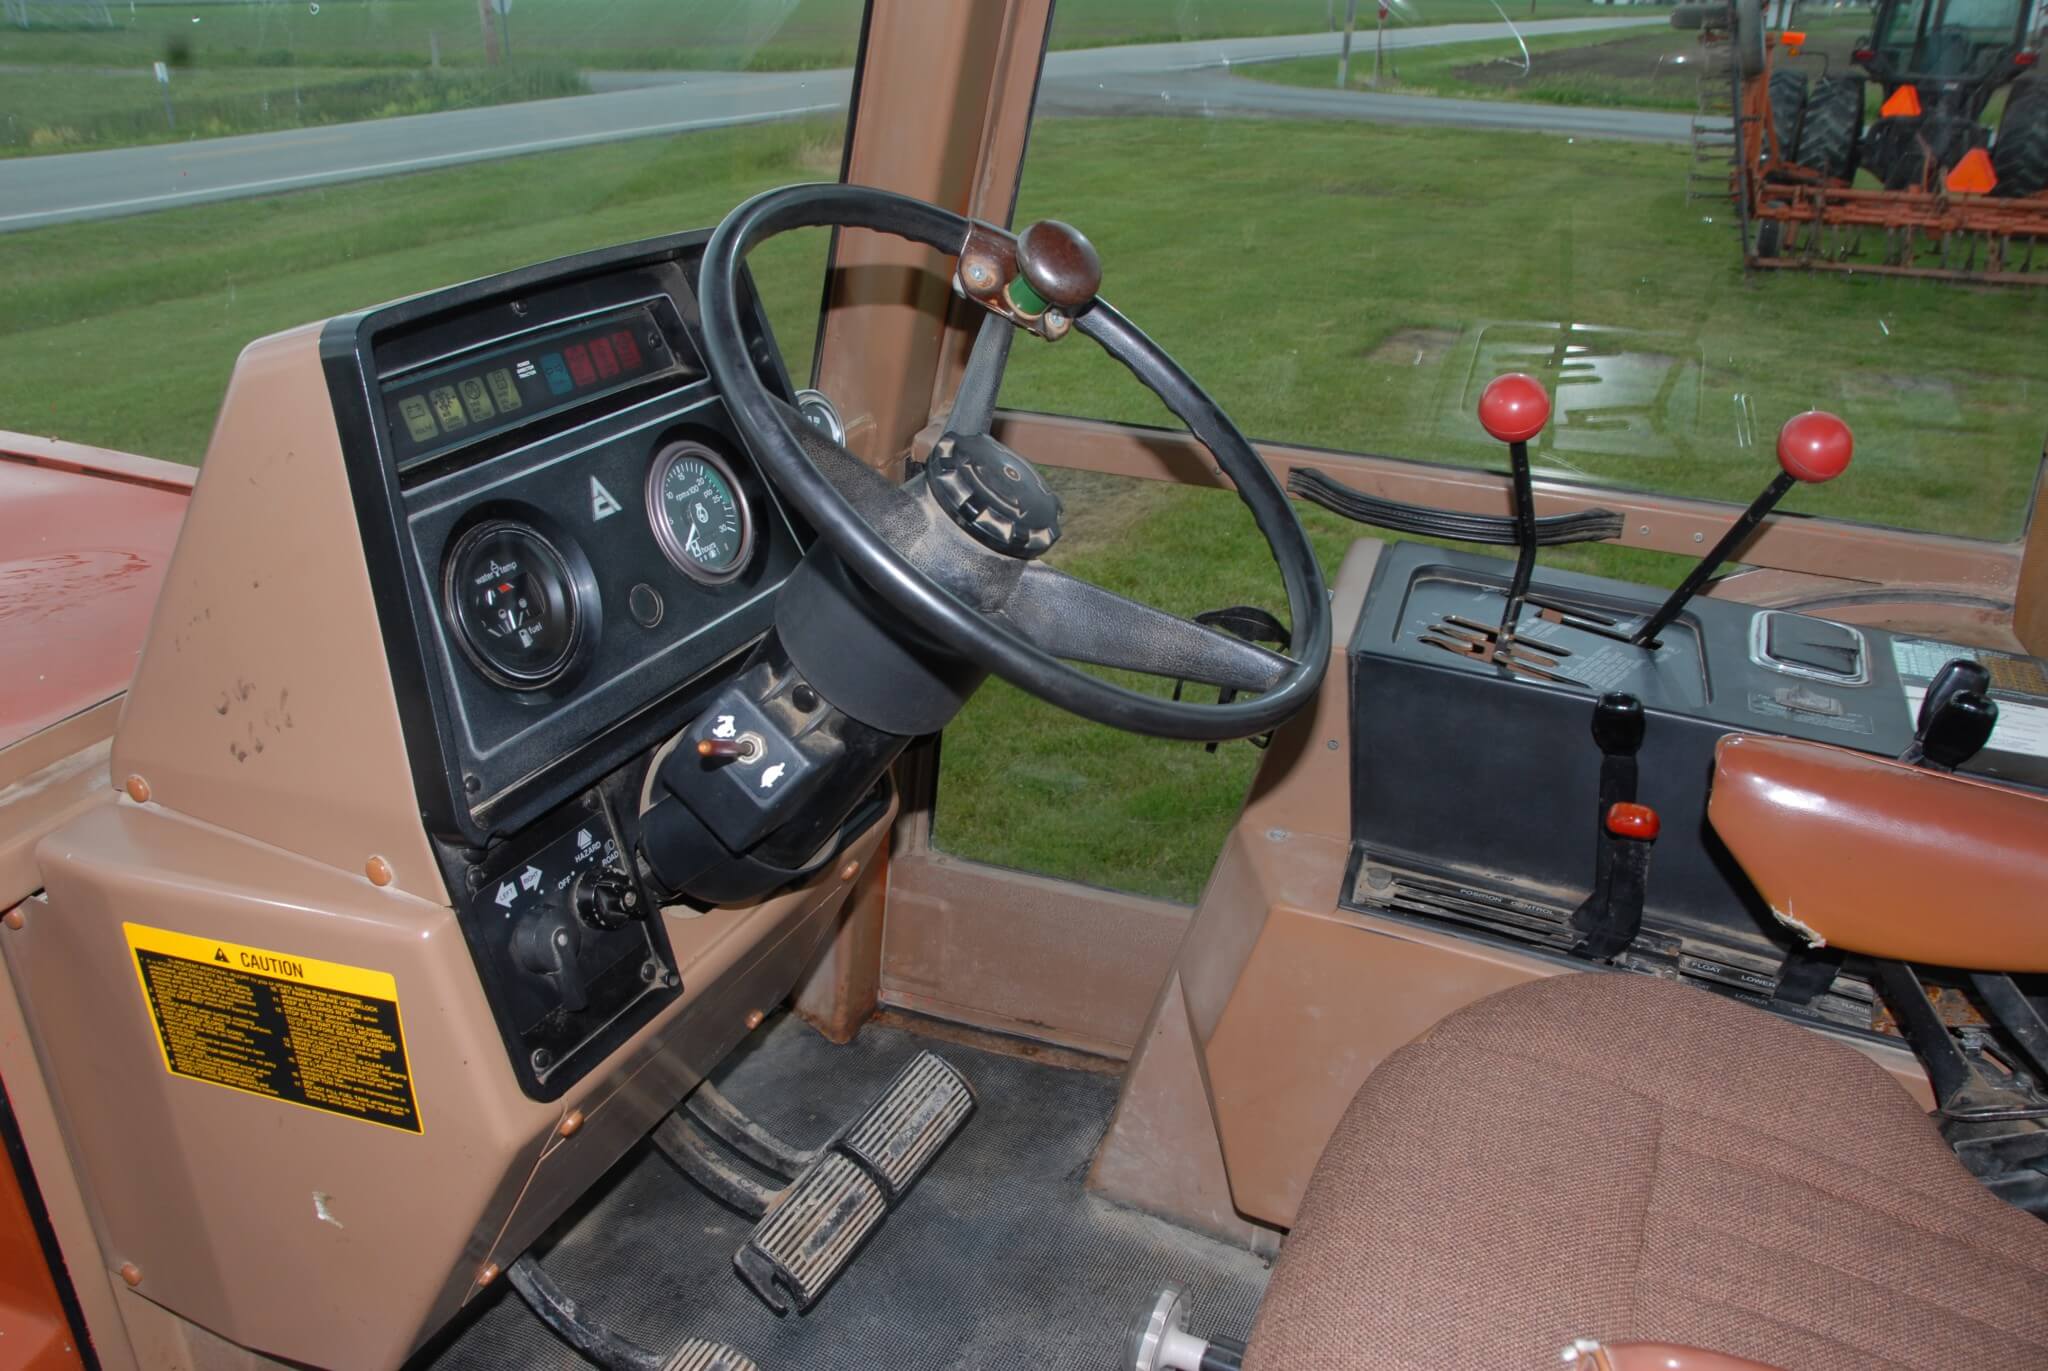 The cab was the equal of anything in the era and nicely laid out. This tractor has the 10-speed partial power shift trans, with a five-speed main gearbox and two-speed range box on the console to the right (tall levers). The partial power shift was controlled by the switch at the base of the steering wheel (rabbit and tortoise) which delivered a clutchless high and low in each of the manual gears.